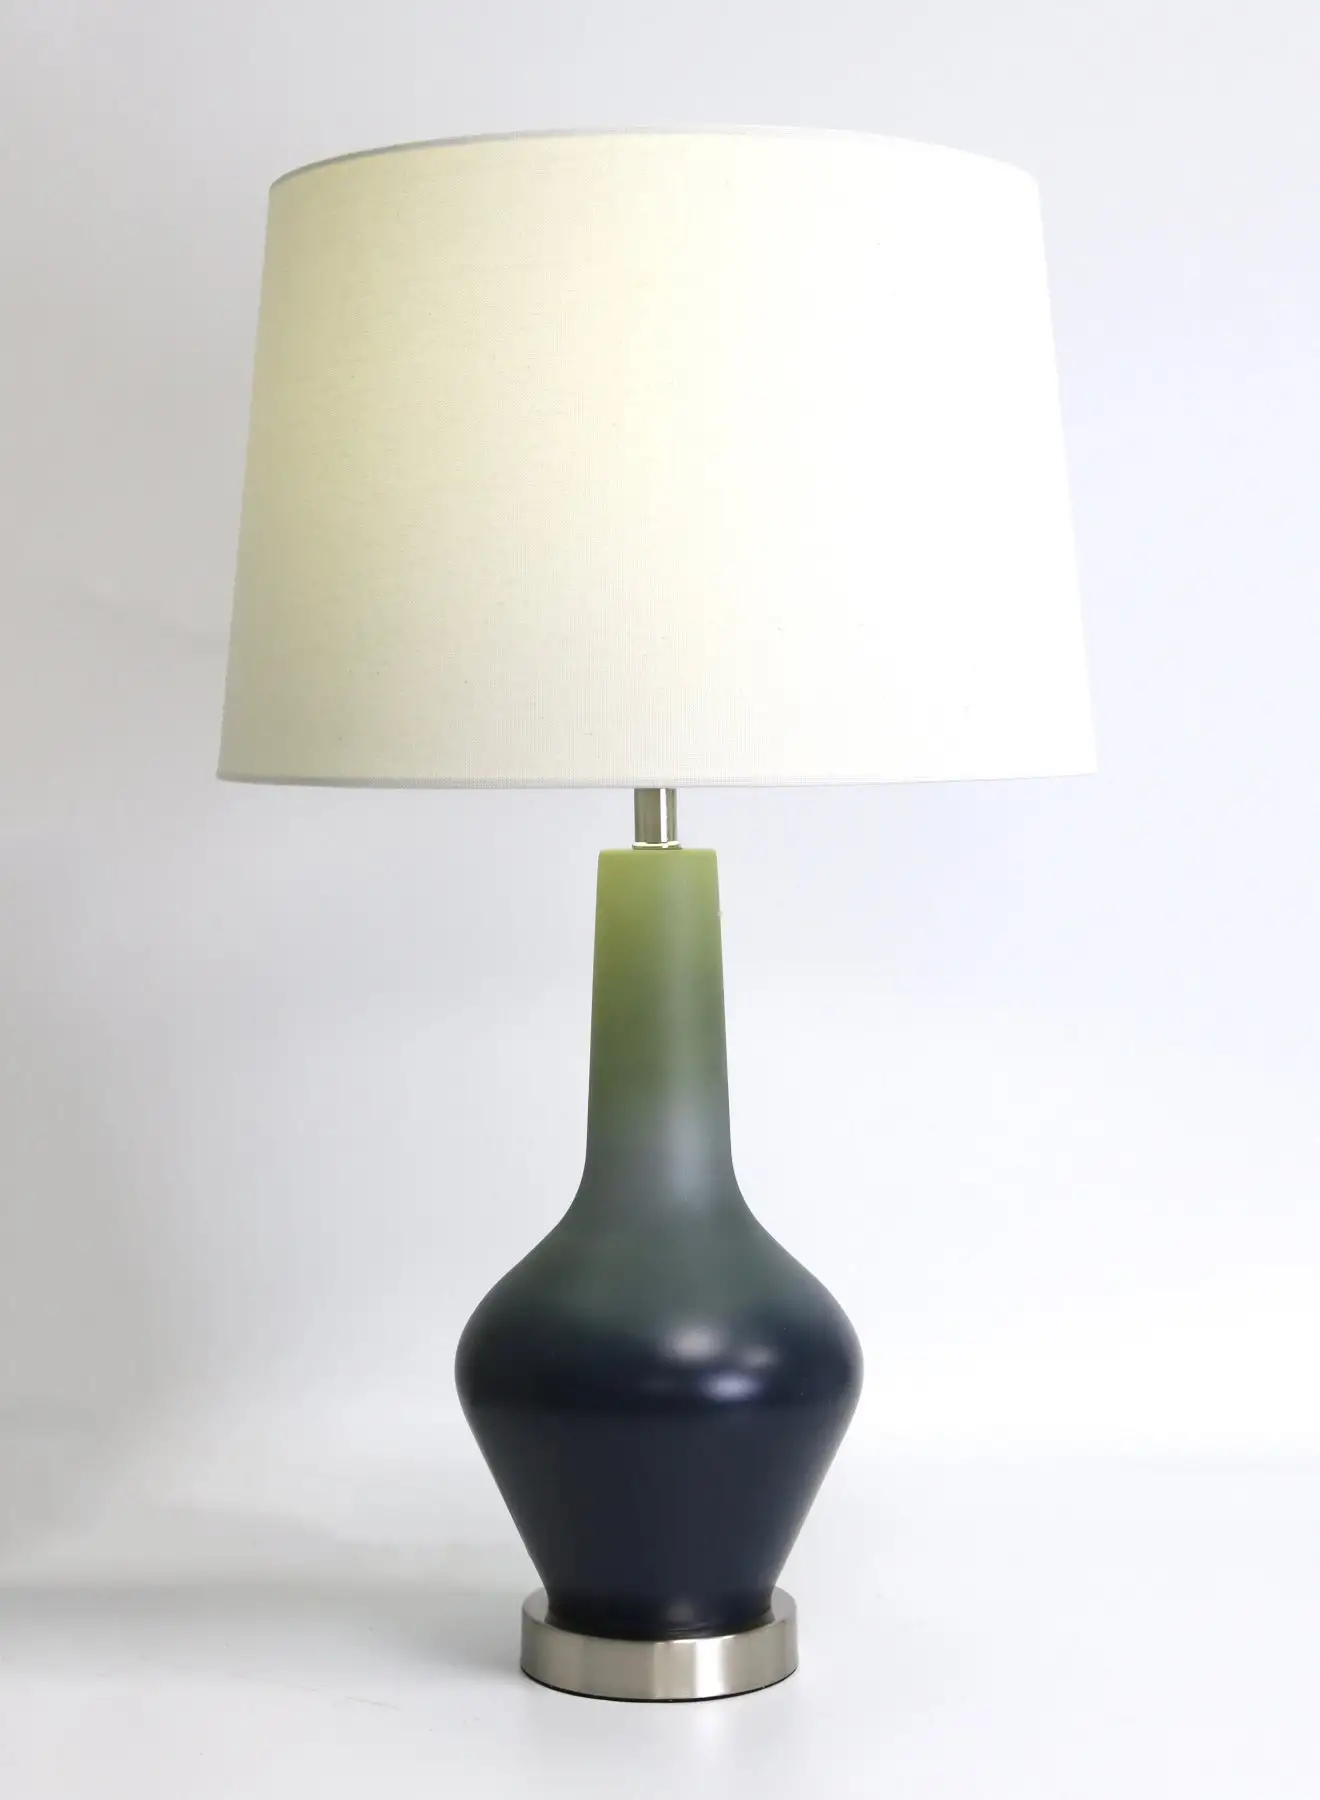 ebb & flow Modern Design Glass Table Lamp Unique Luxury Quality Material for the Perfect Stylish Home RSN71040 Green 15 x 24.5